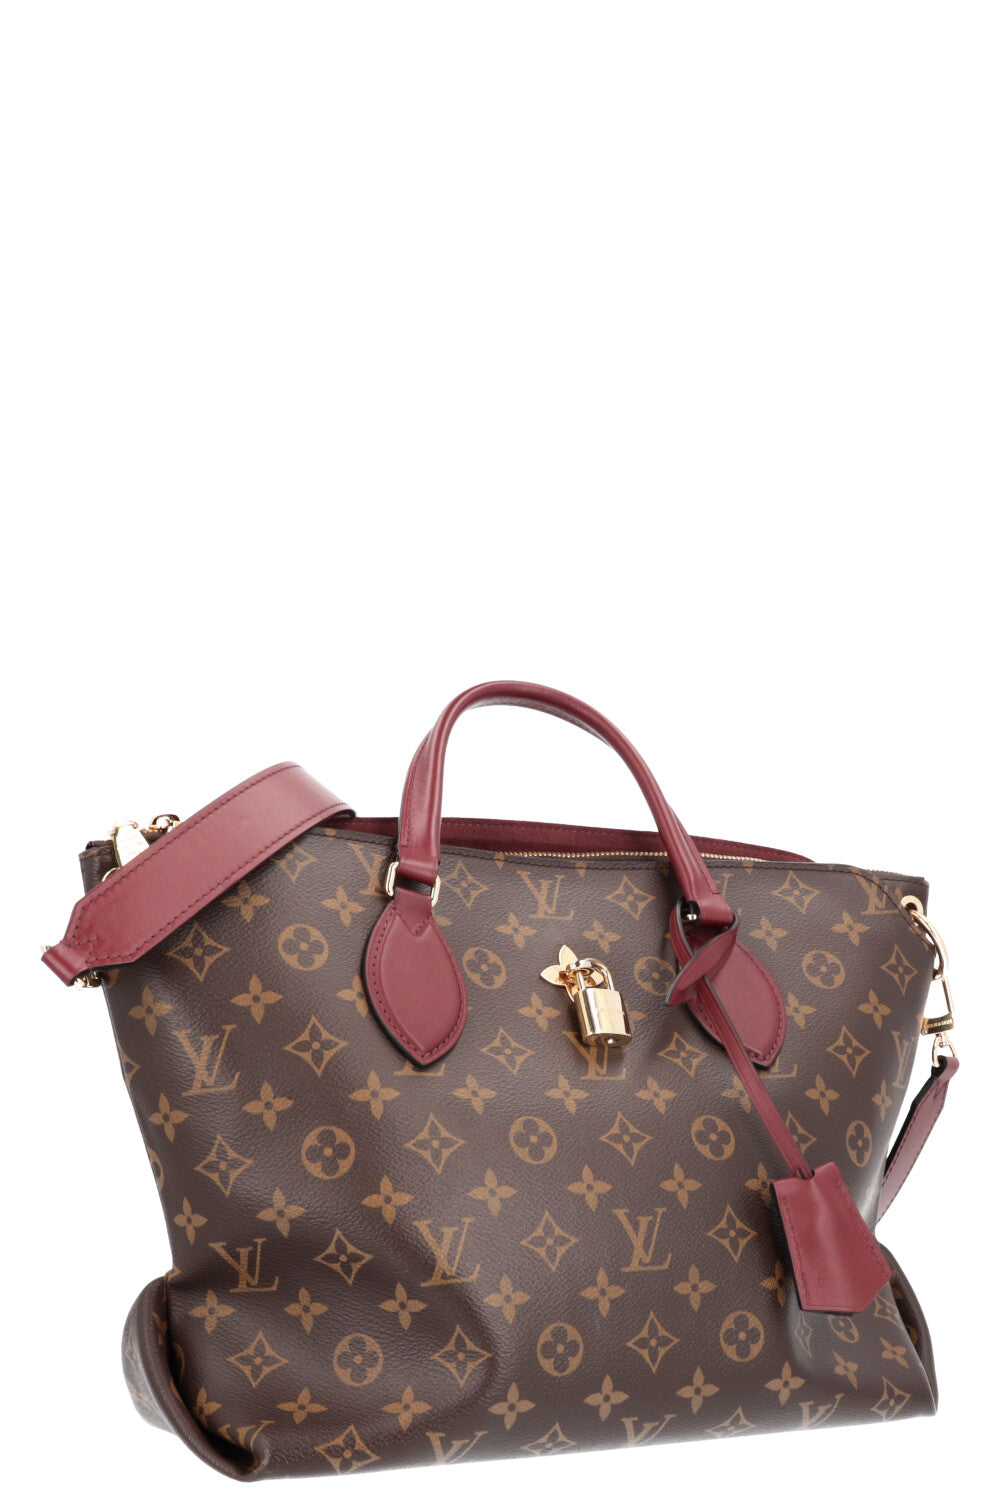 Louis Vuitton Flower Tote Mng 0528